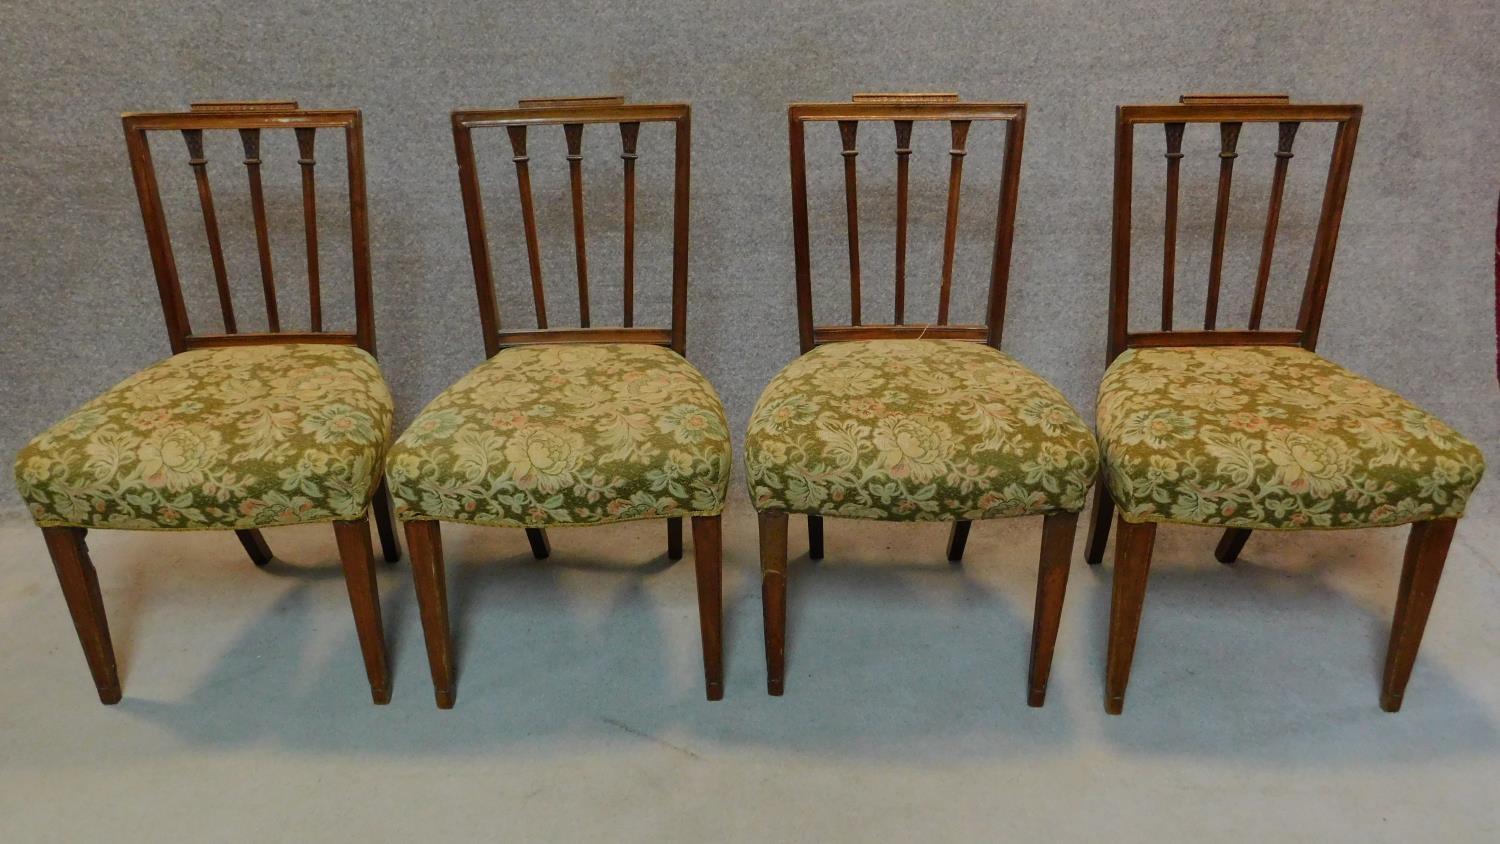 A set of four 19th century Hepplewhite style mahogany dining chairs with stuffover floral